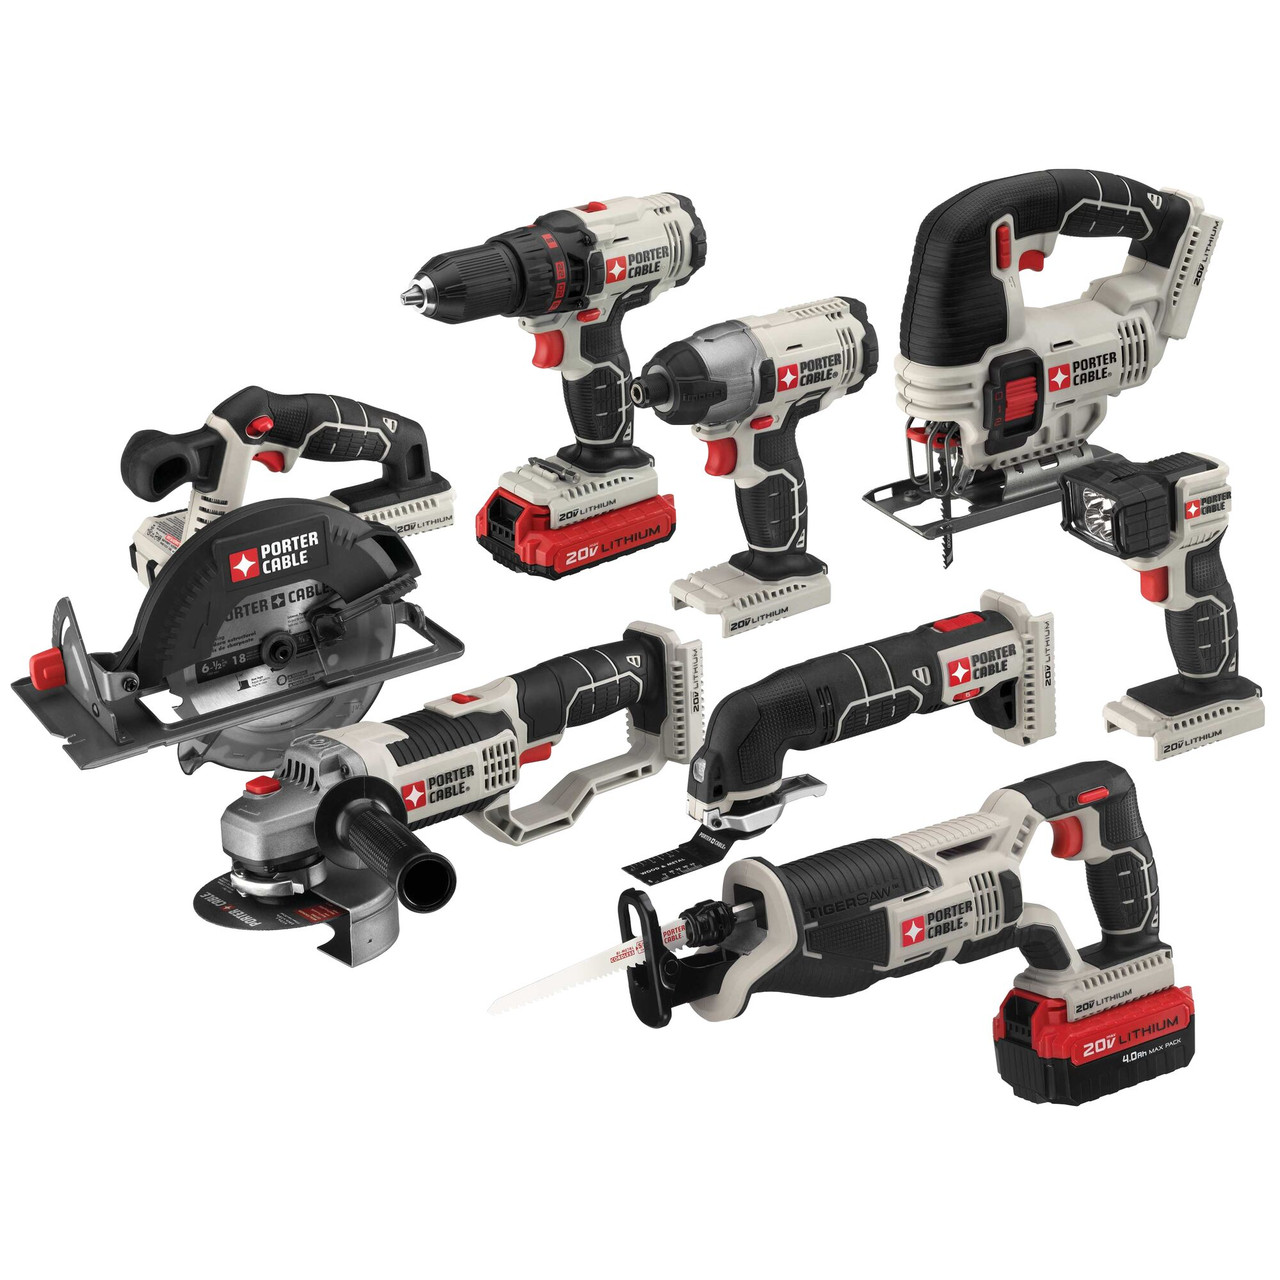 Porter Cable 20V Max Cordless Drill Combo Kit, Tools #PCCK619L8 (13  Piece) AFT Fasteners